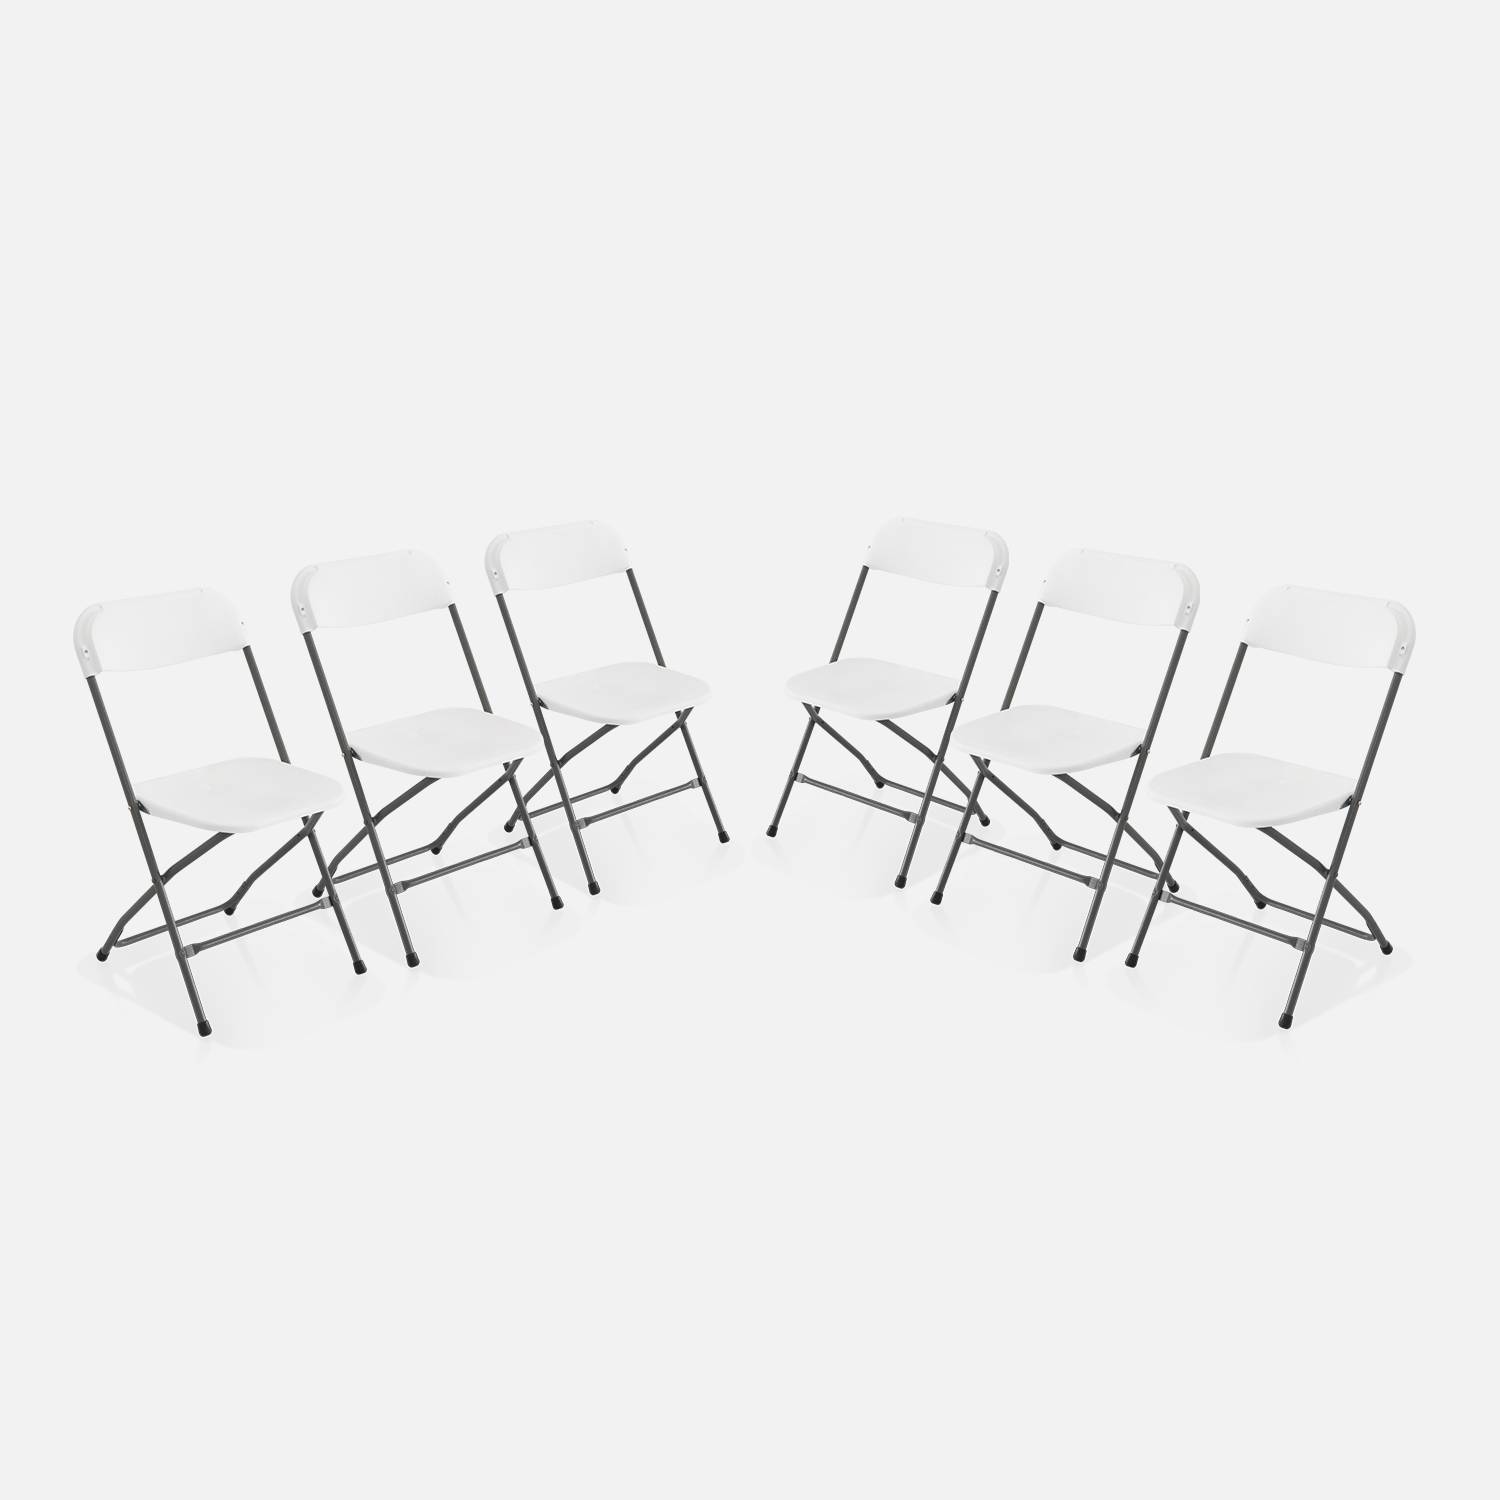 Set of 6 folding event chairs - Fiesta - plastic seats and metal frame, white Photo3